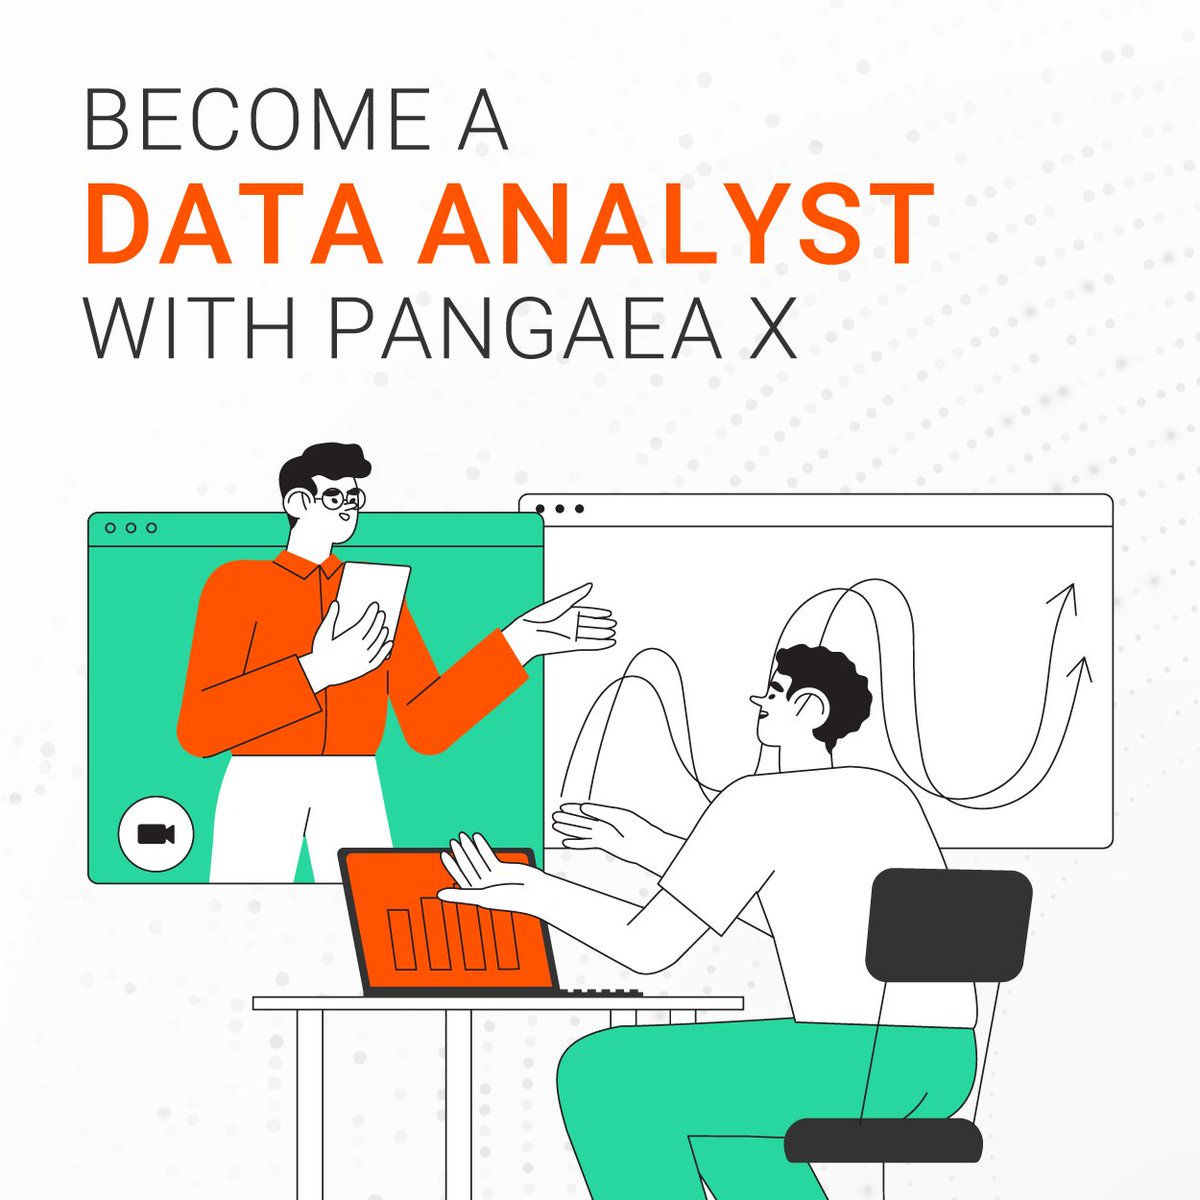 Numbers speak louder than words! Become a data analyst with Pangaea X and let your analytical skills create waves of impact in a data-driven world.

#AI #future #technology #data #datacareer #datascience #PangaeaX #Xmarksthespot